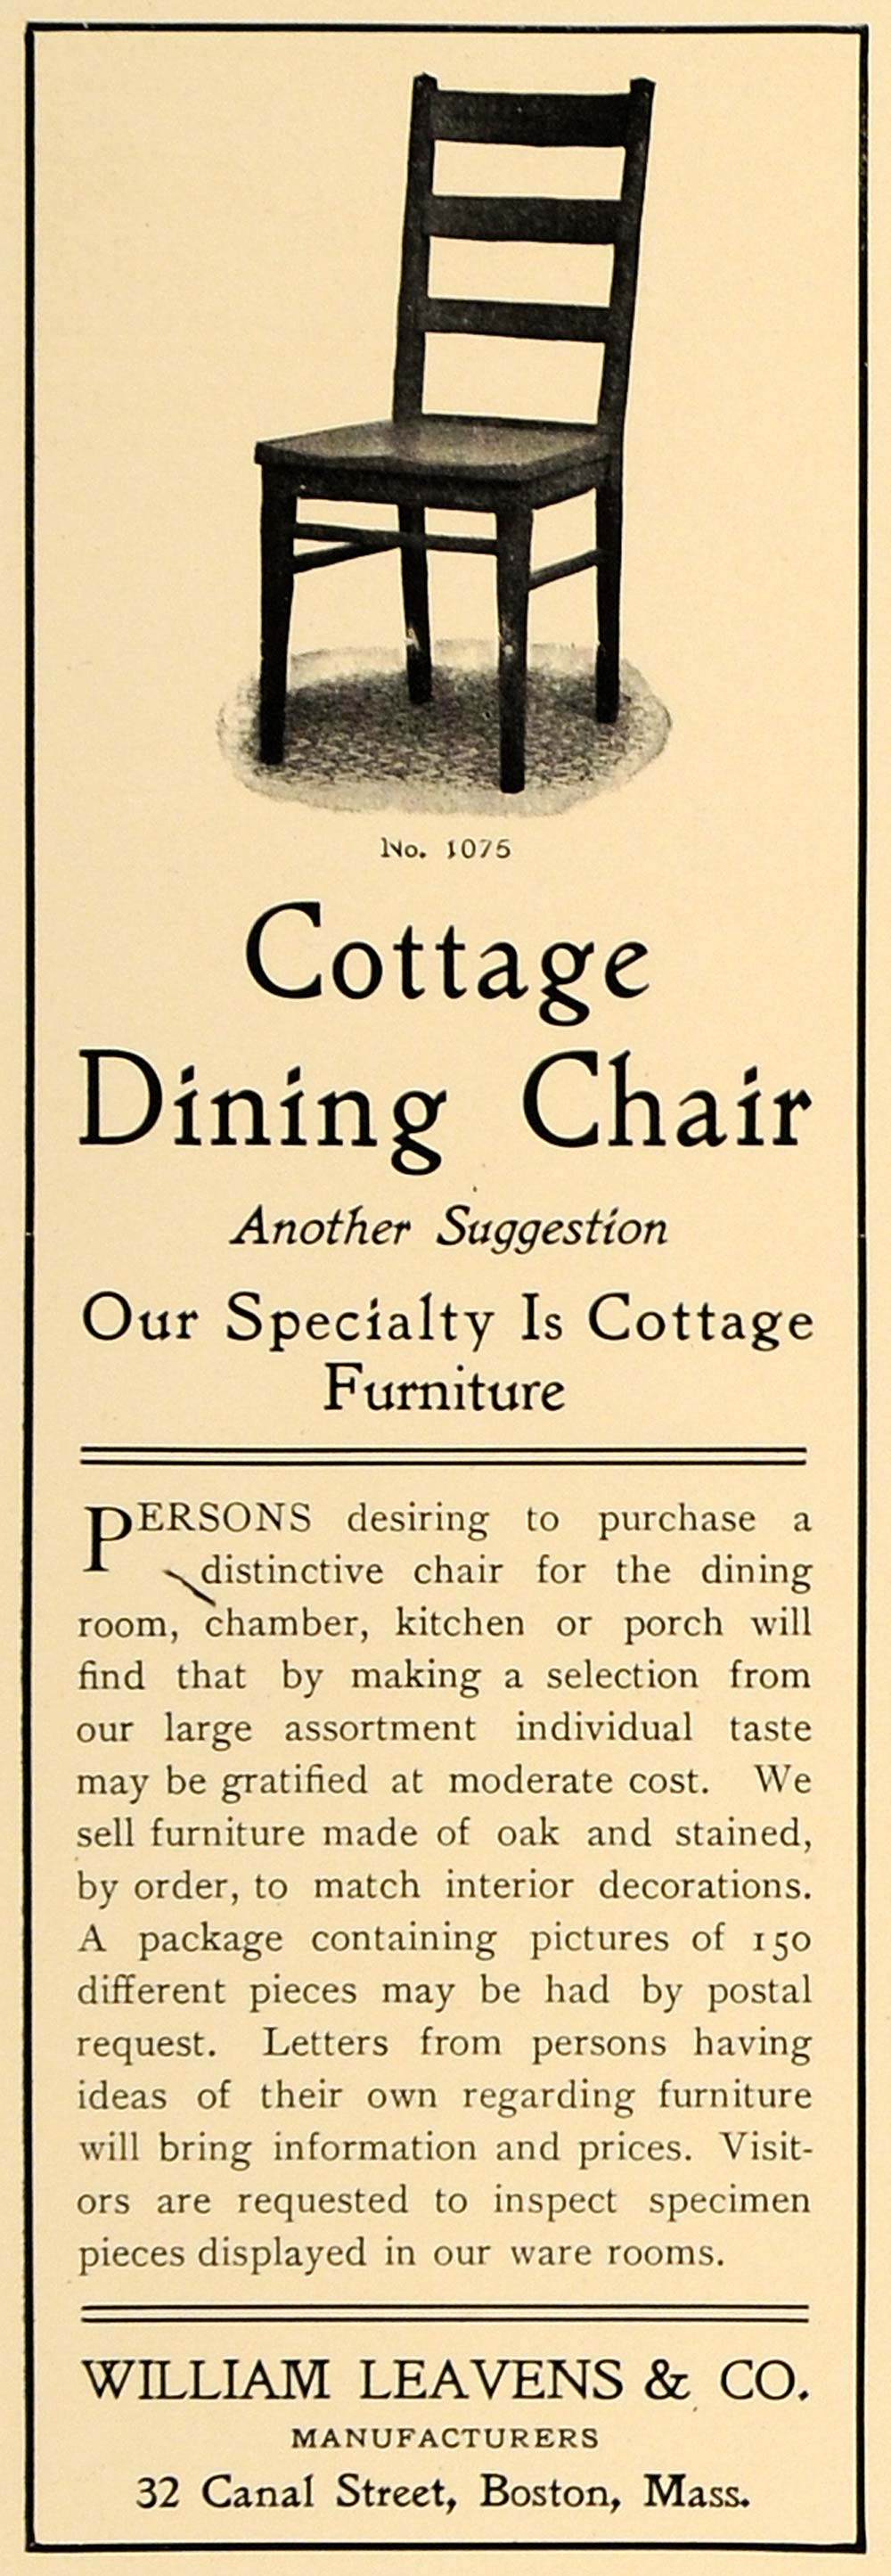 1906 Ad William Leavens Cottage Dining Chair No. 1075 - ORIGINAL ADVERTISING CL4